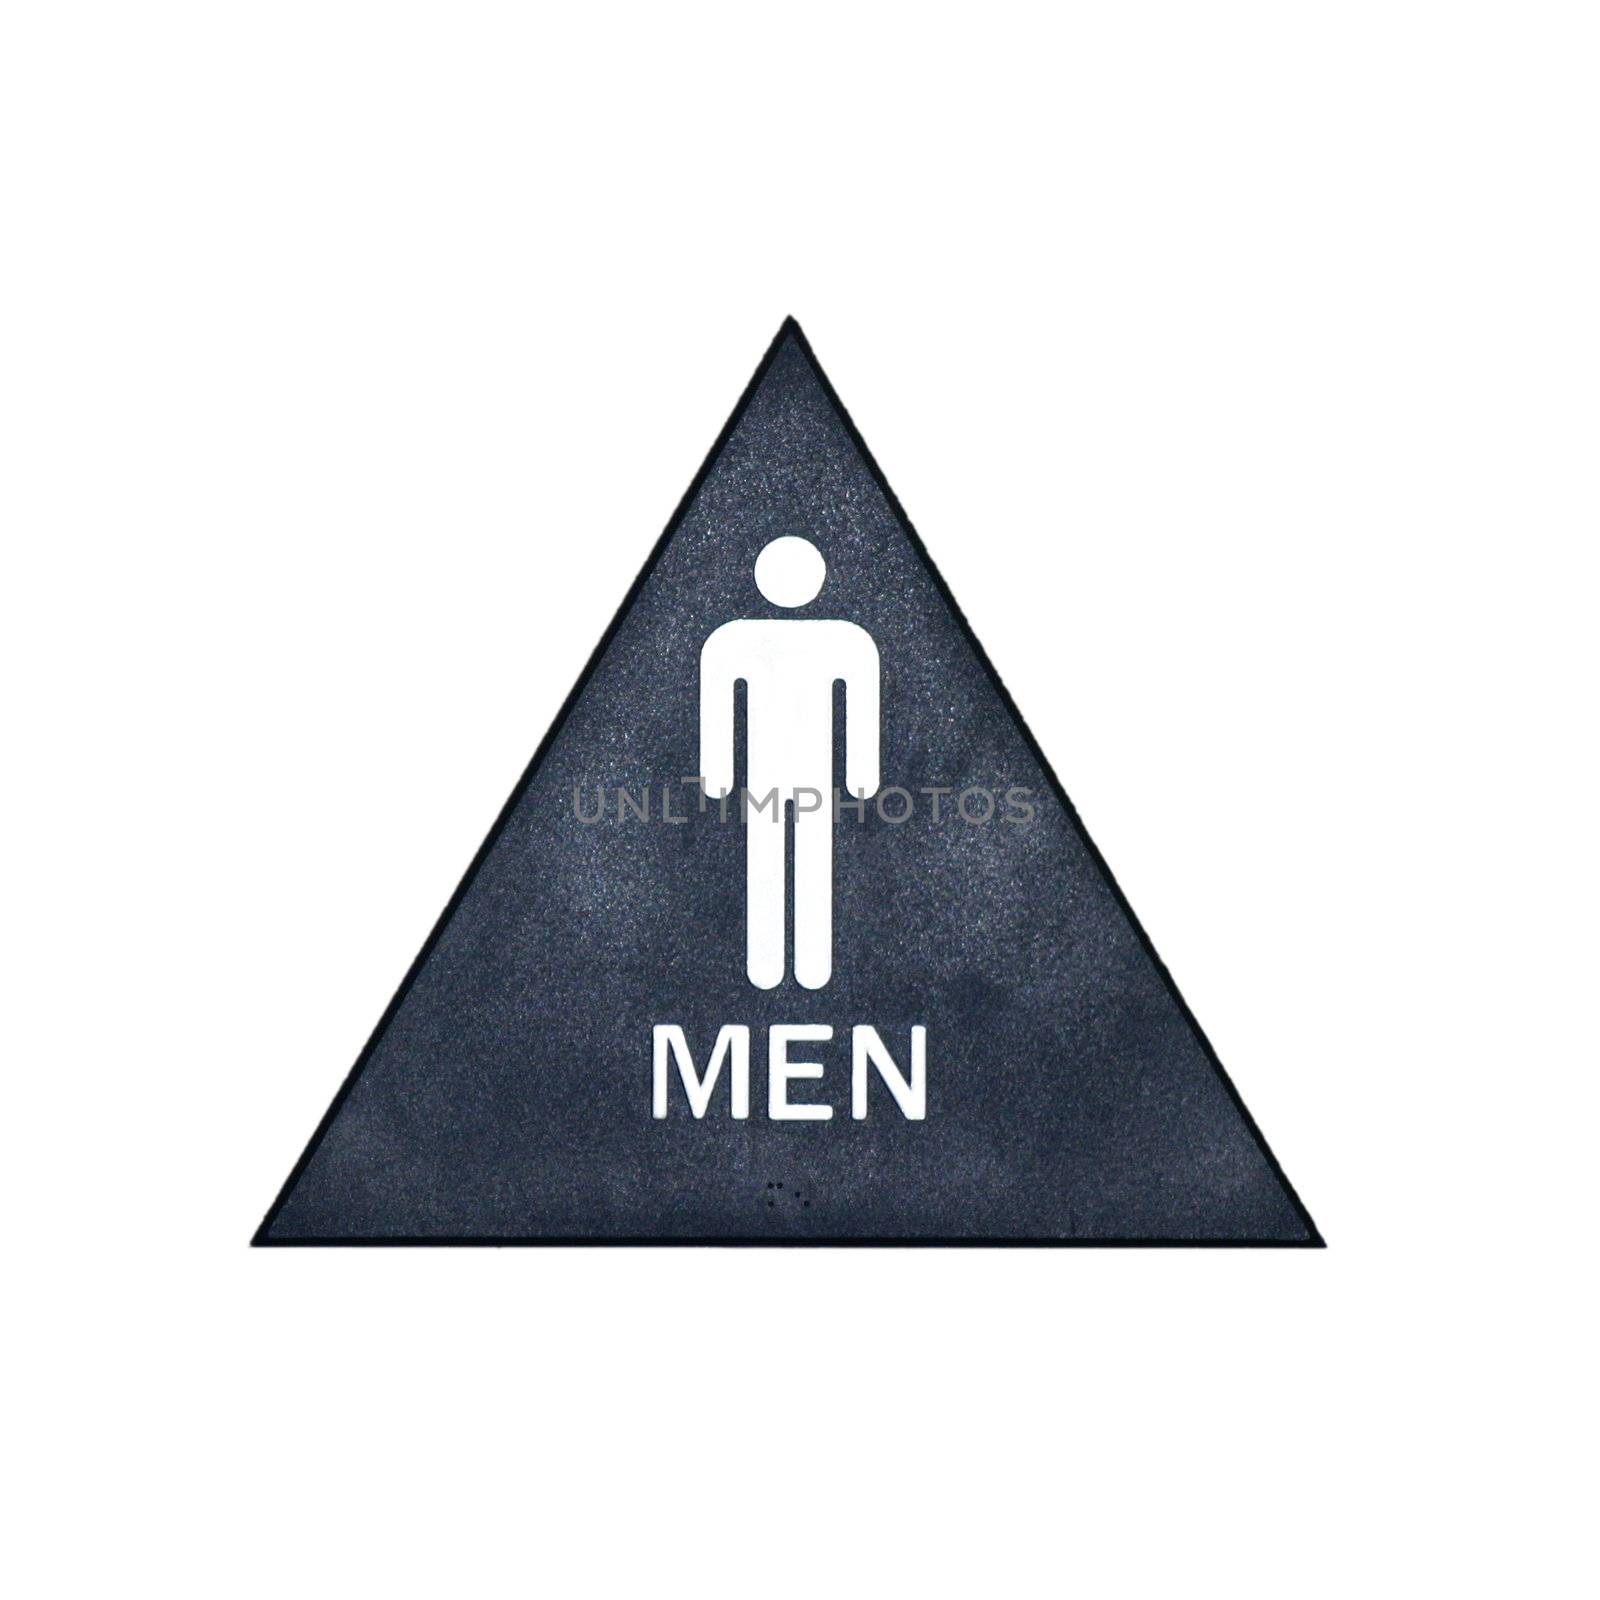 A blue, white, and gray restroom sign for men